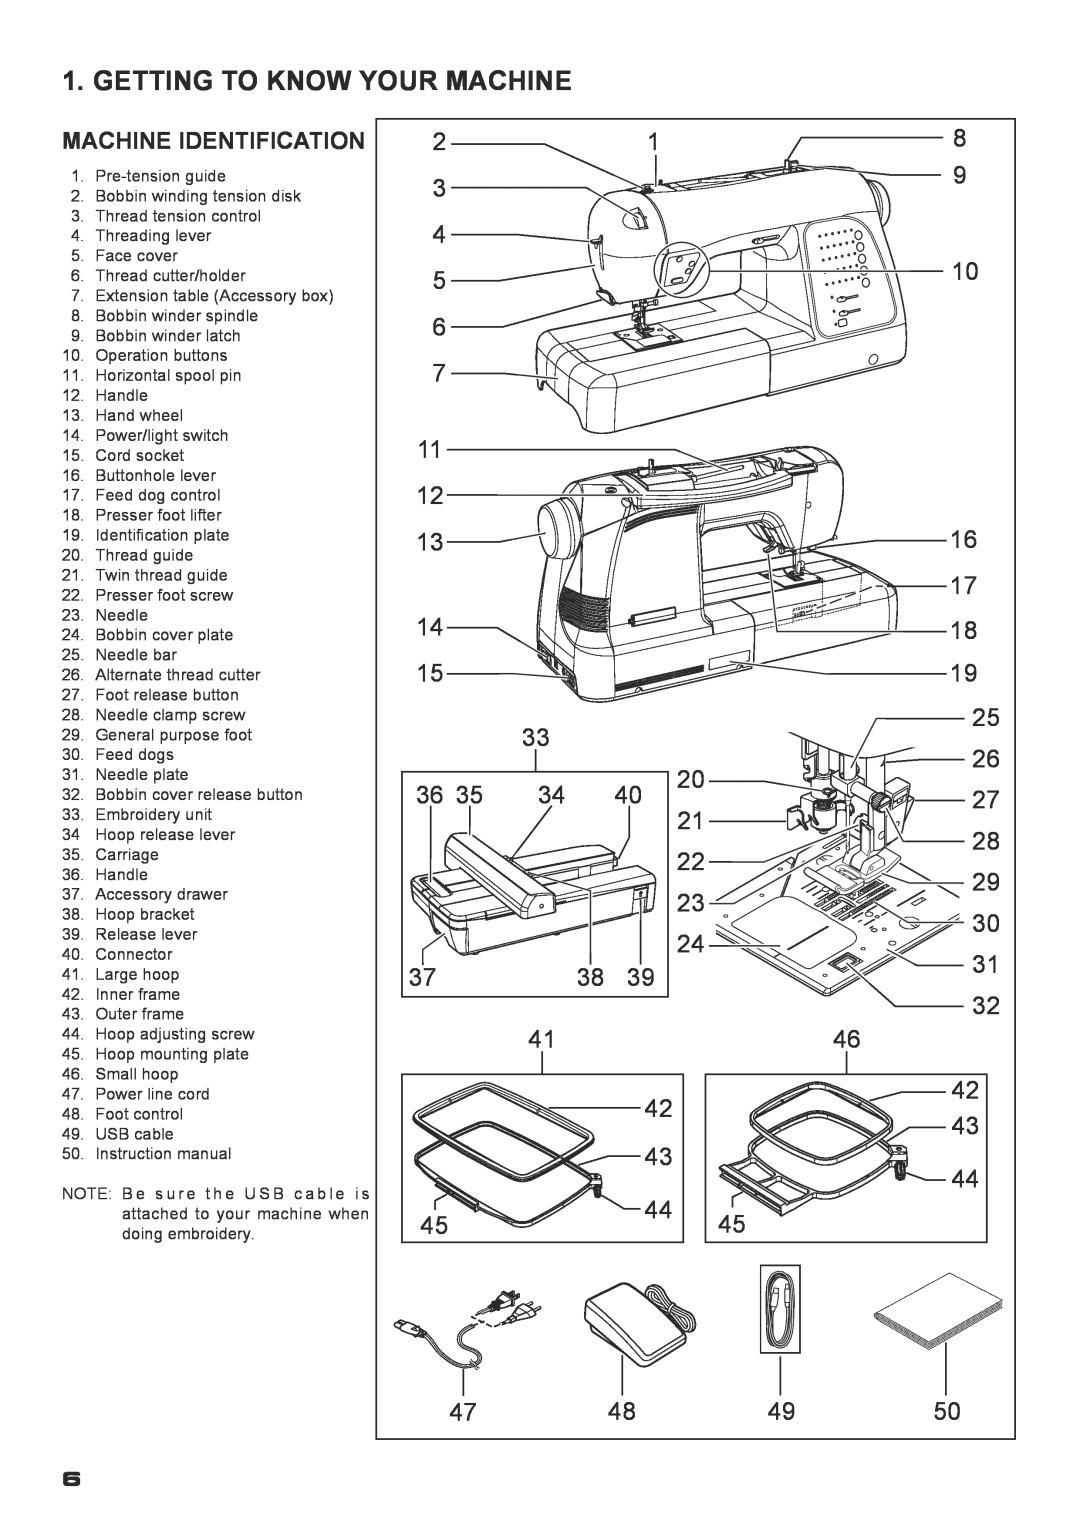 Singer XL-400 instruction manual Getting To Know Your Machine, Machine Identification 